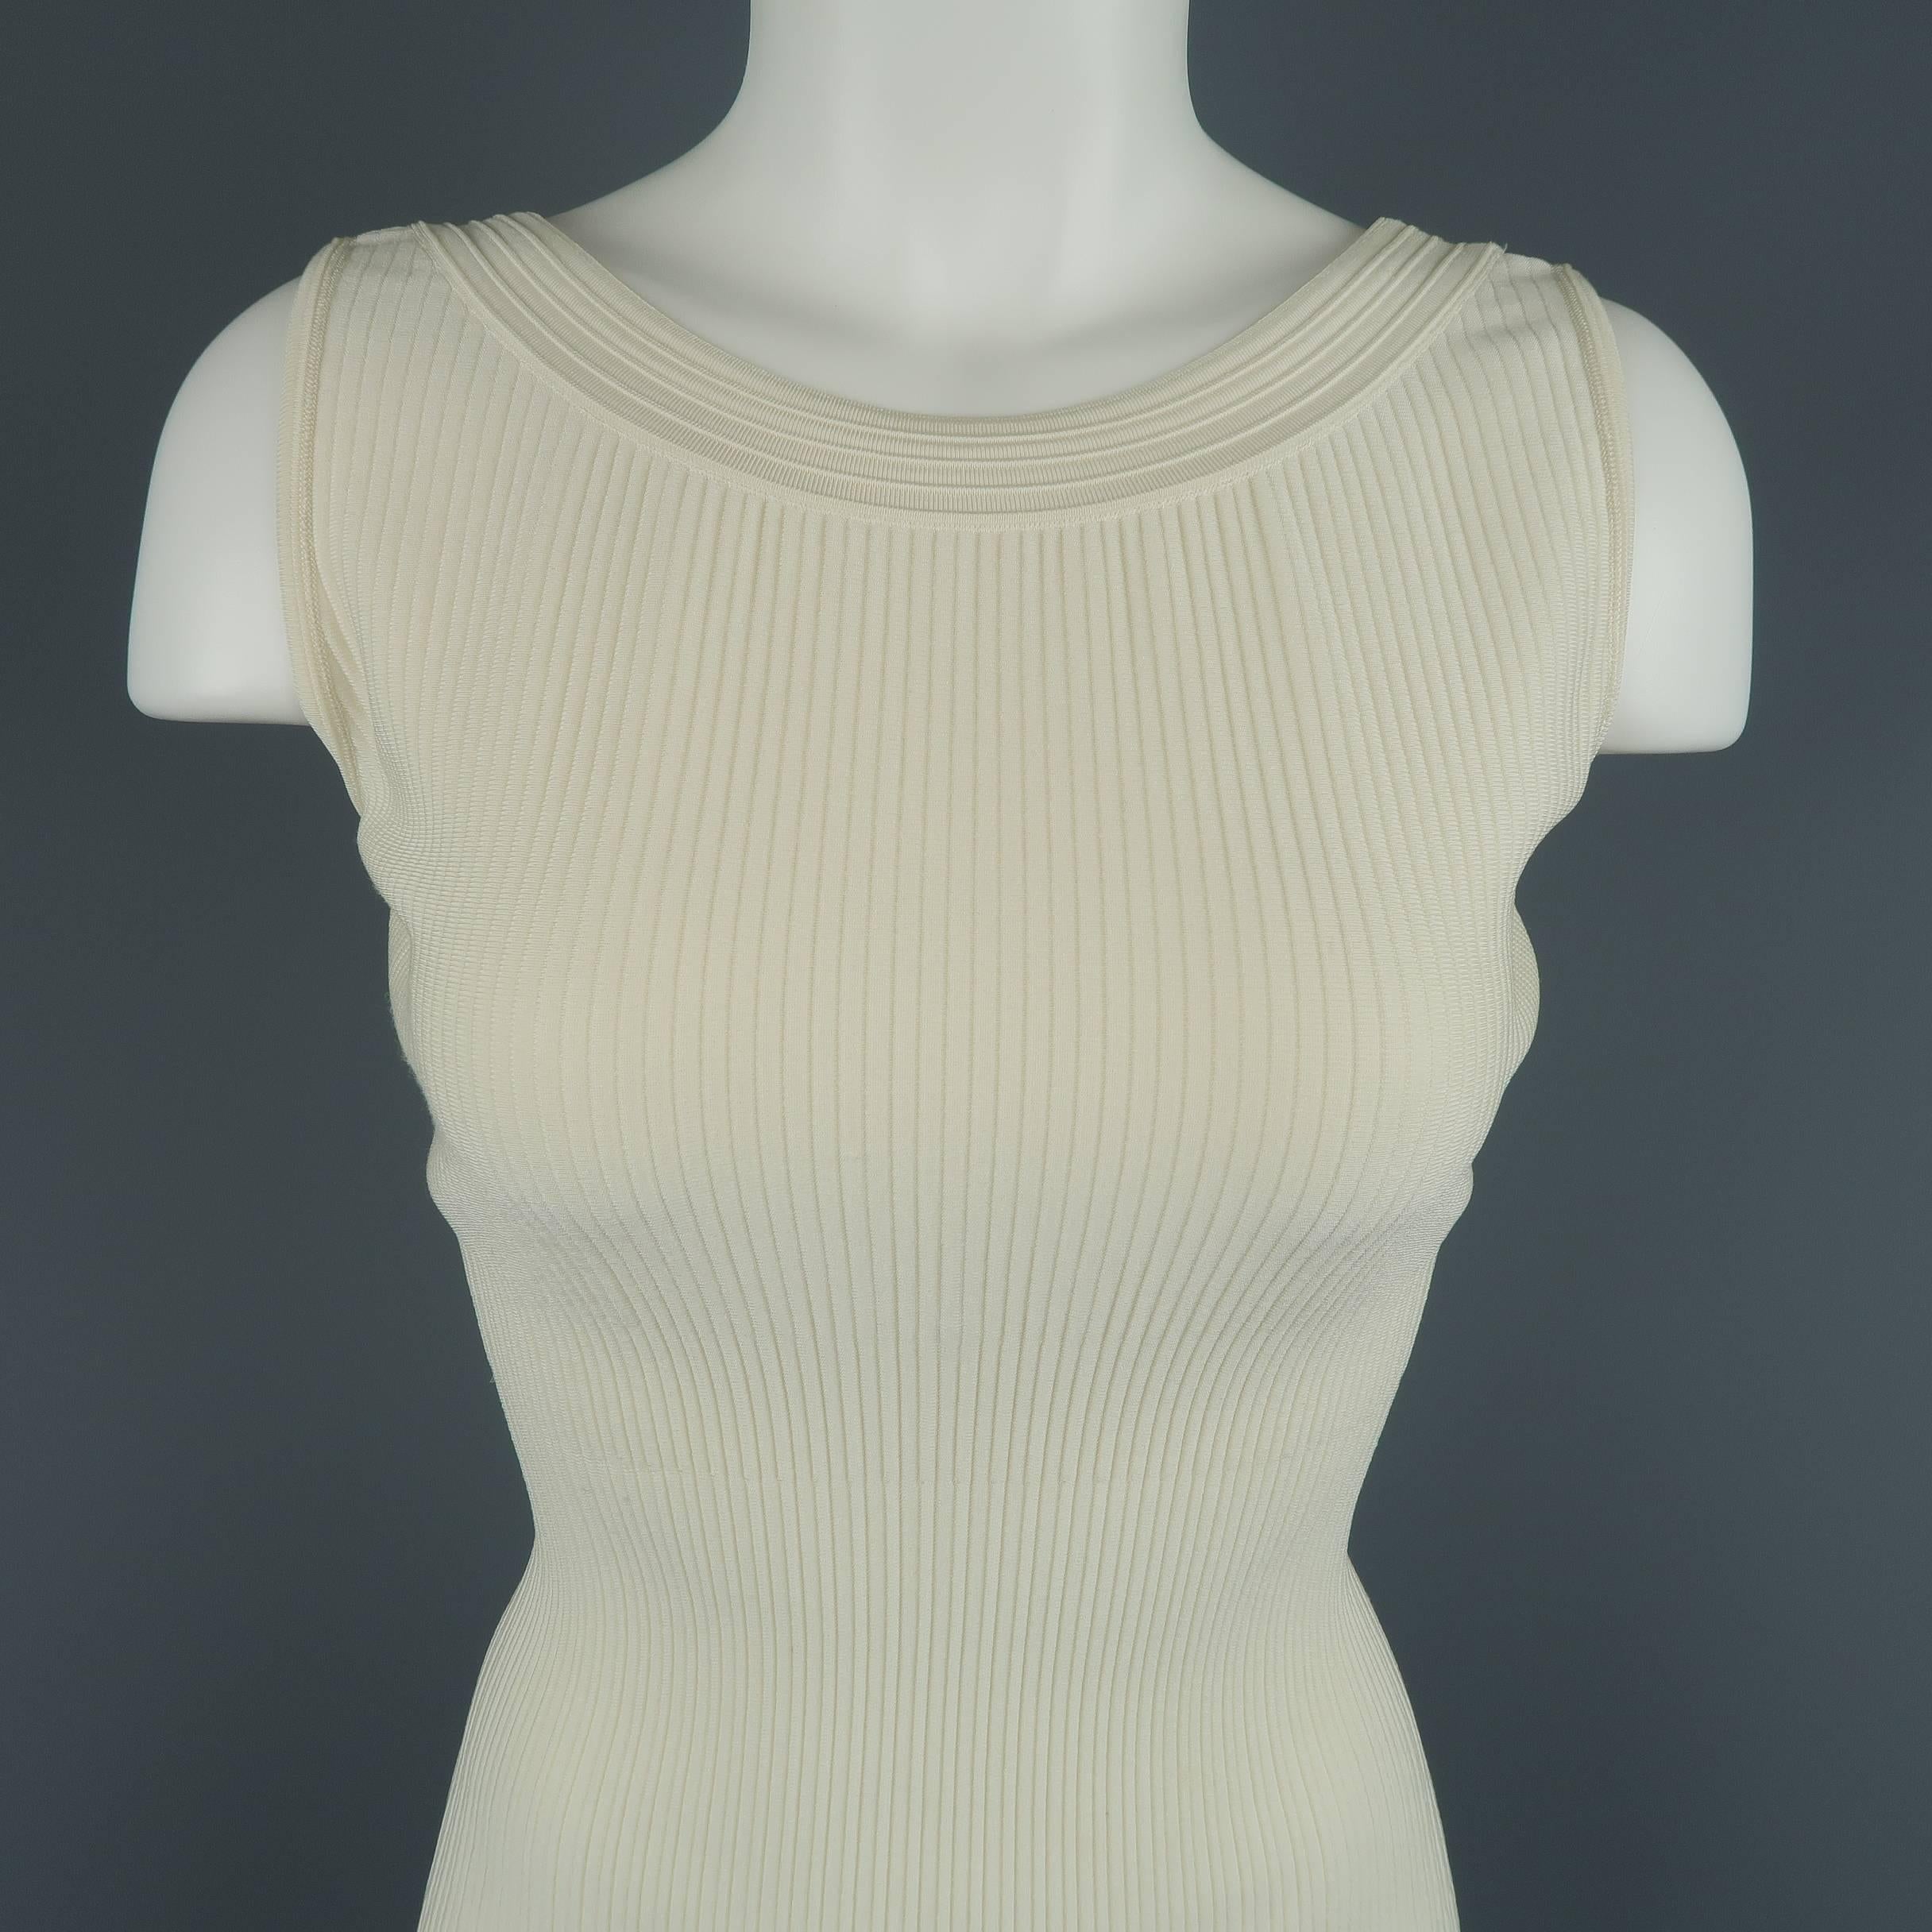 ALAIA bodycon dress comes in creamy beige ribbed stretch knit with a scoop neck and deep V back. Made in Italy.
 
Excellent Pre-Owned Condition.
Marked: XS
 
Measurements:
 
Shoulder: 12.5 in.
Bust: 36 in.
Waist: 22 in.
Hip: 26 in.
Length: 39 in.